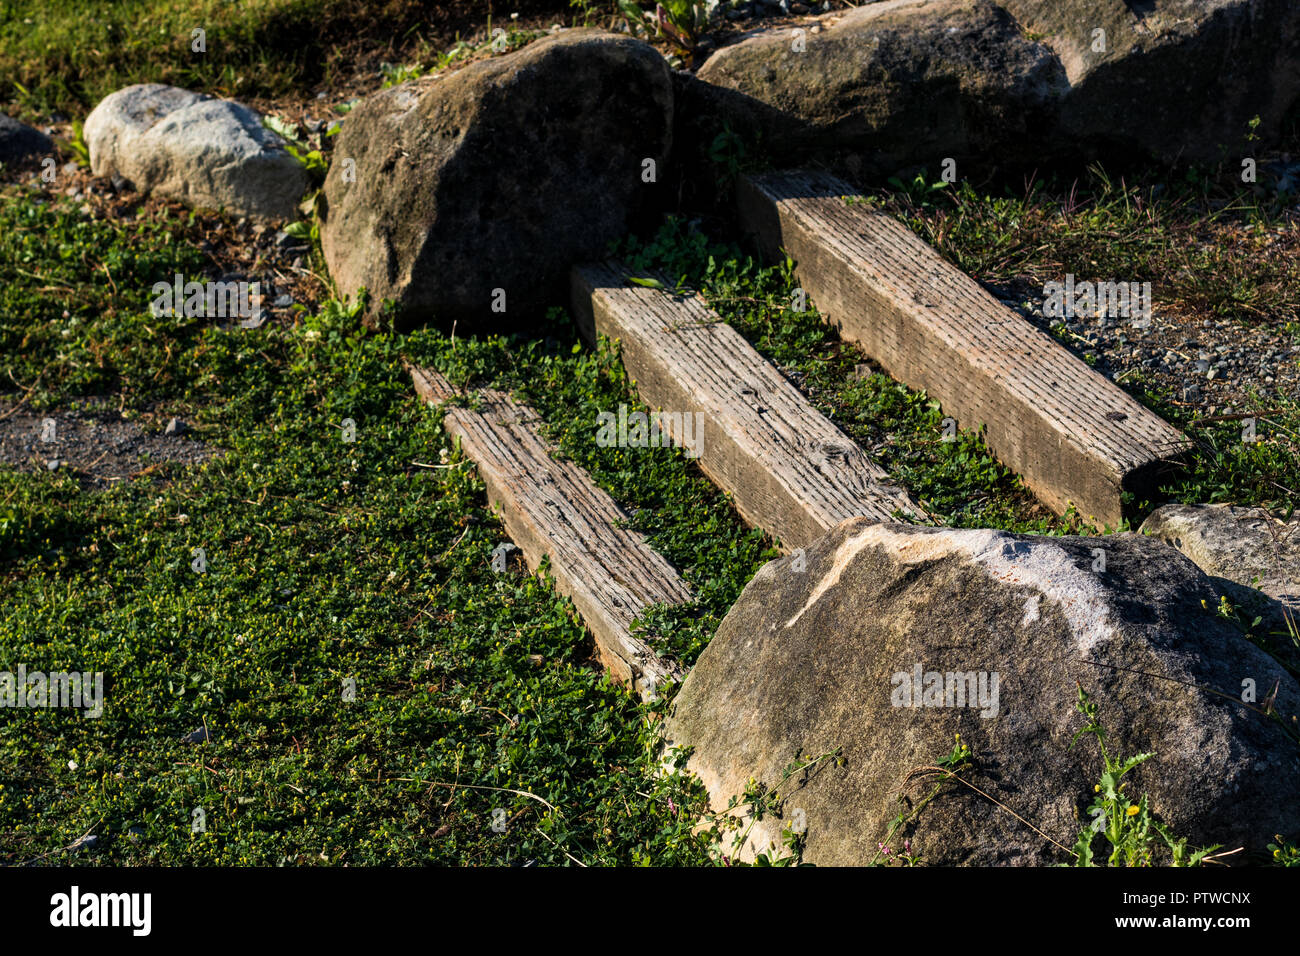 Park wooden stairs with grass and rocks by pressure treated lumber Stock Photo